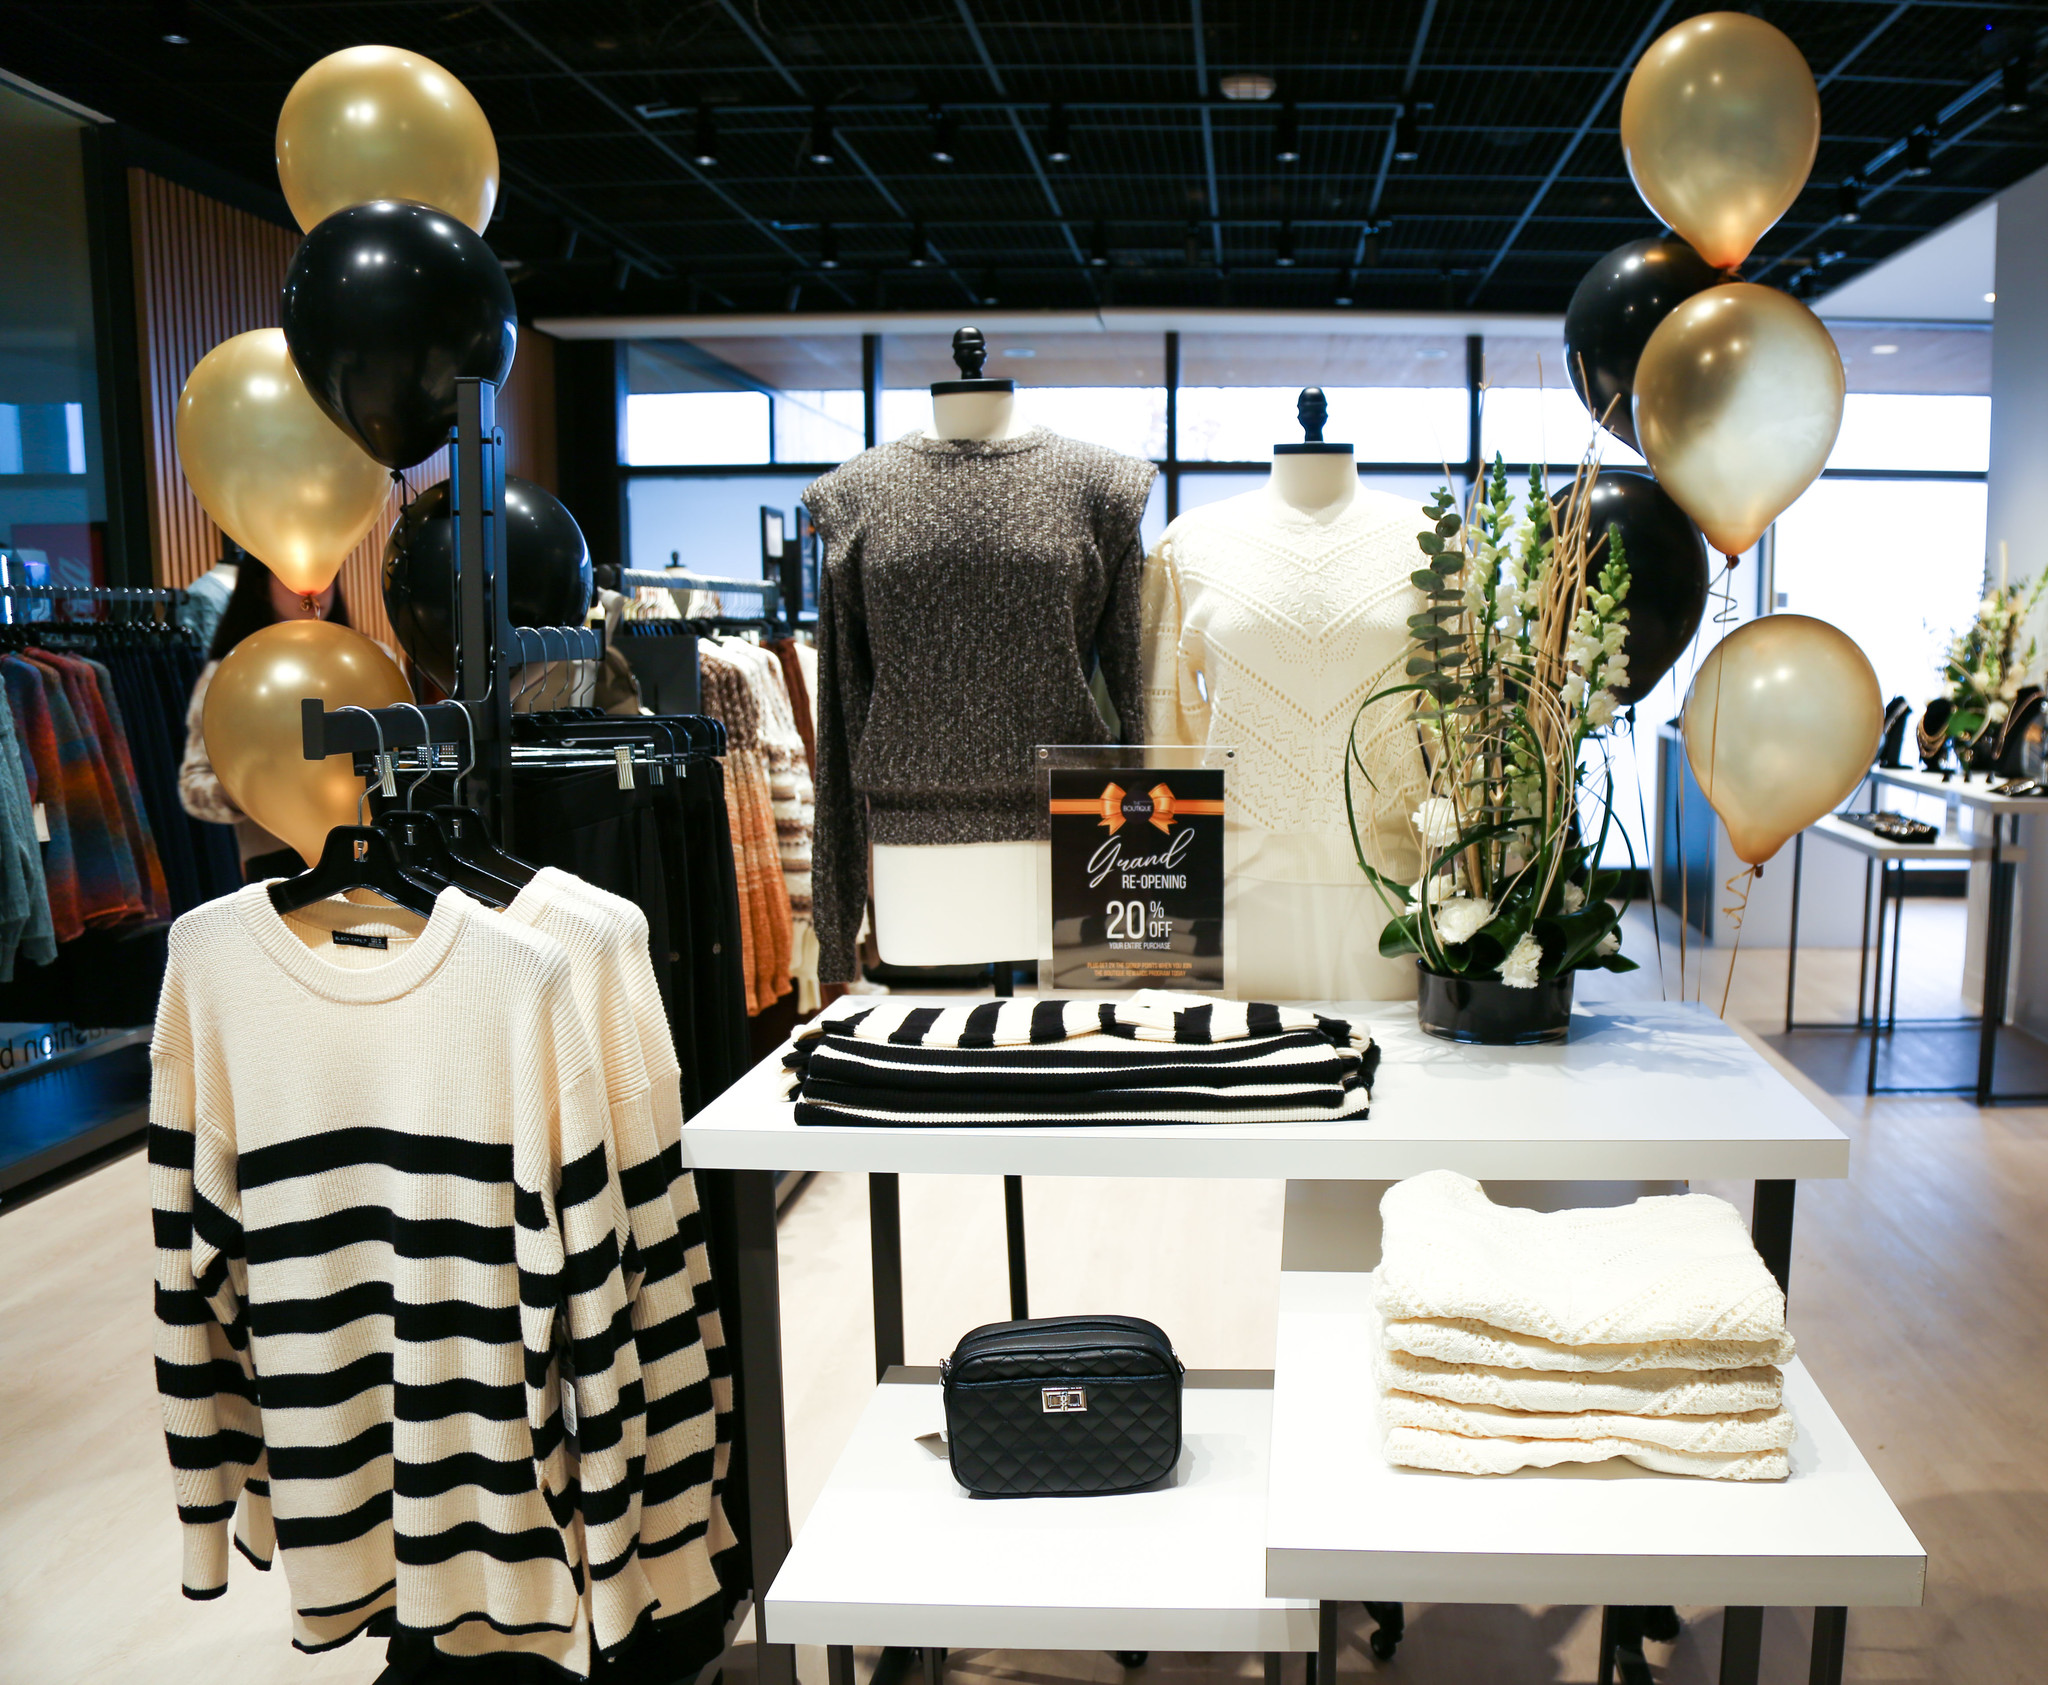  The Boutique at Seneca has re-opened!  